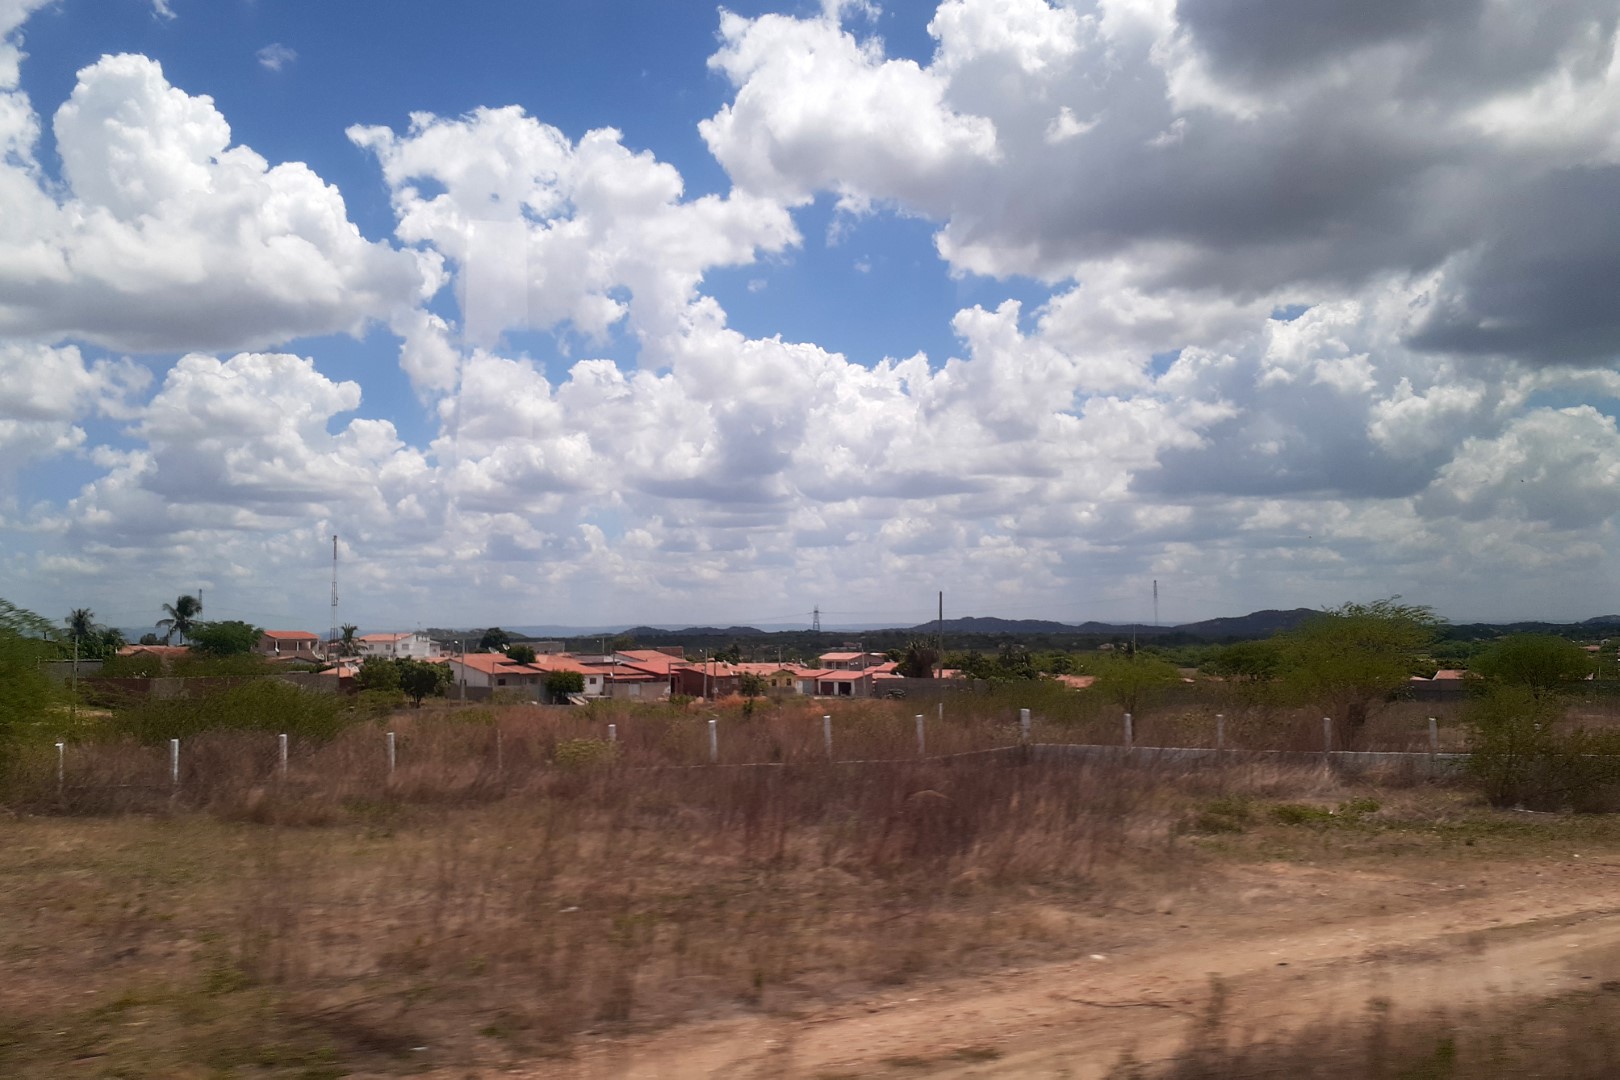 Somewhere between Fortaleza and Natal...